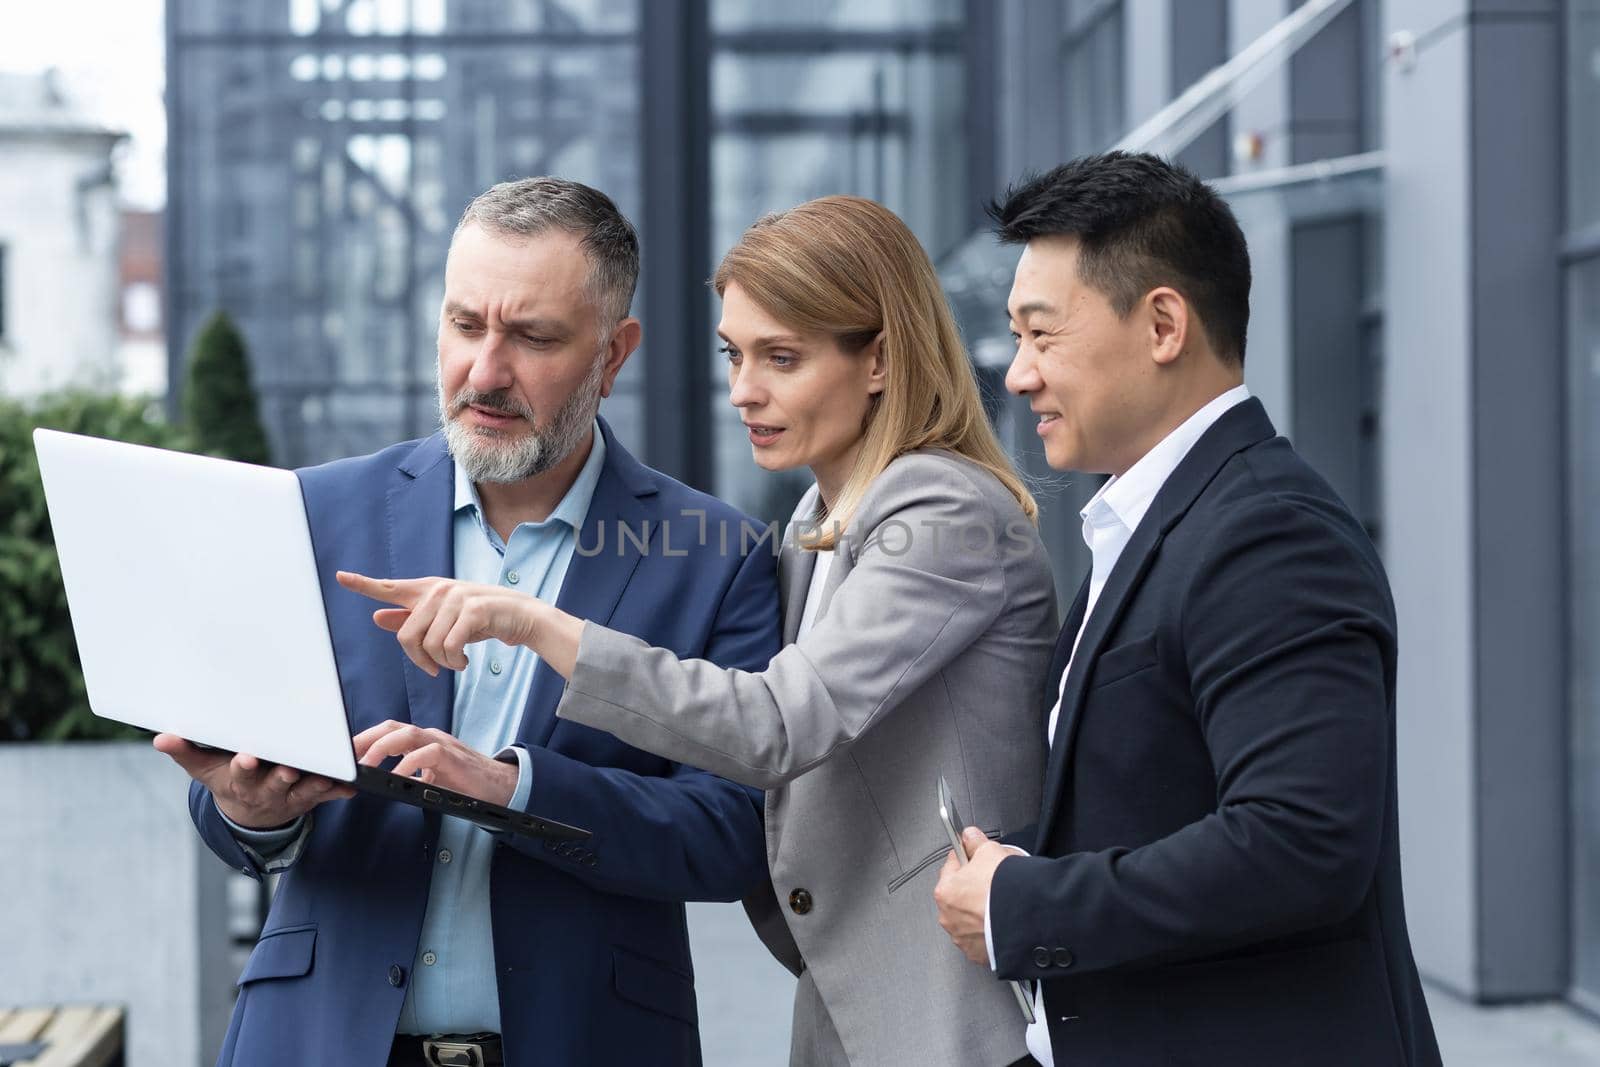 Successful business team, three colleagues businessman and businesswoman outside office building discussing current plans and management, looking at laptop screen, discussing and consulting